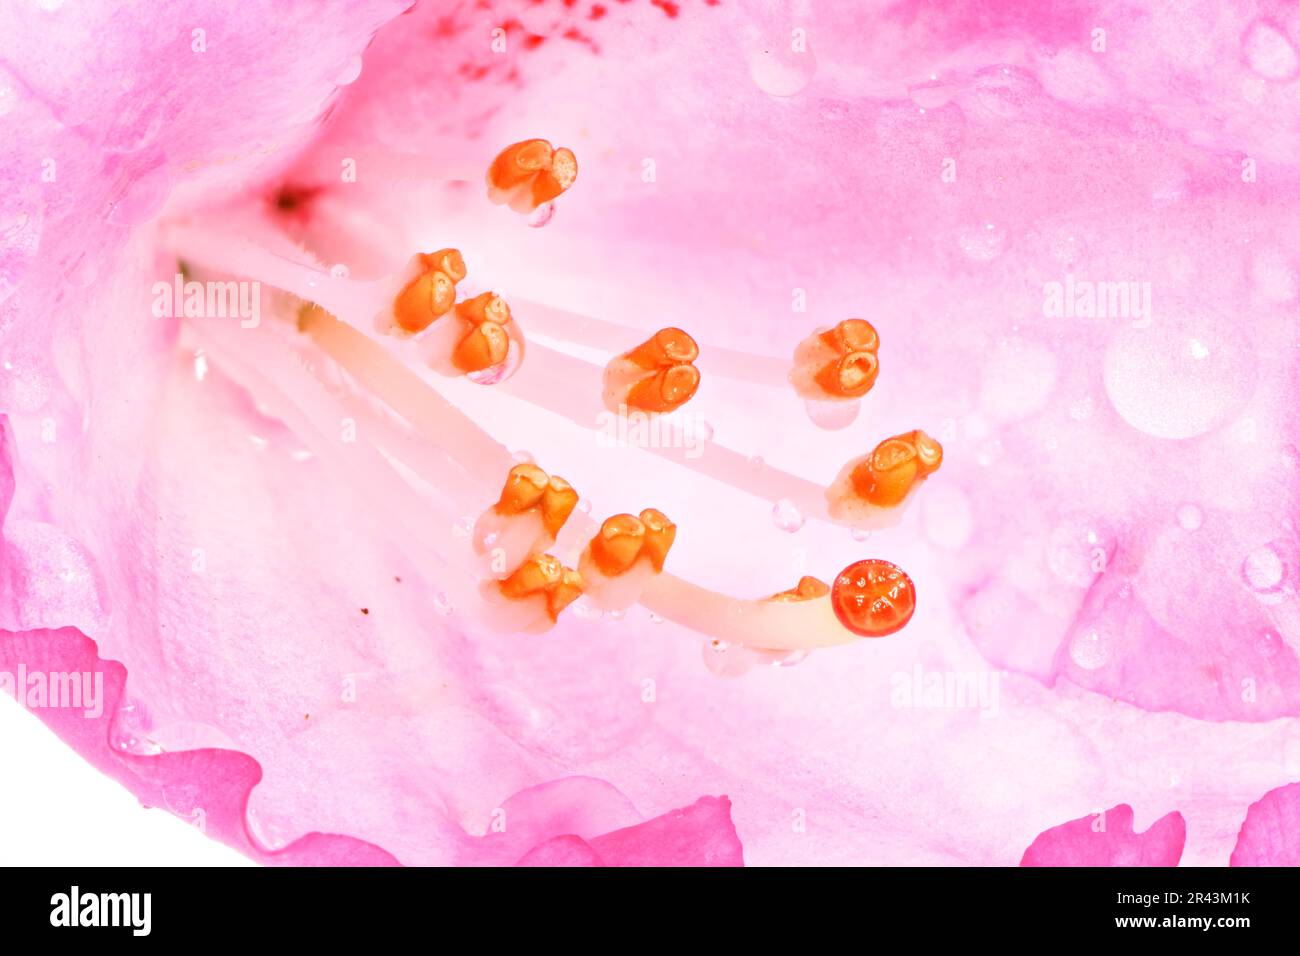 Macro of a pink rhododendron blossom Stock Photo